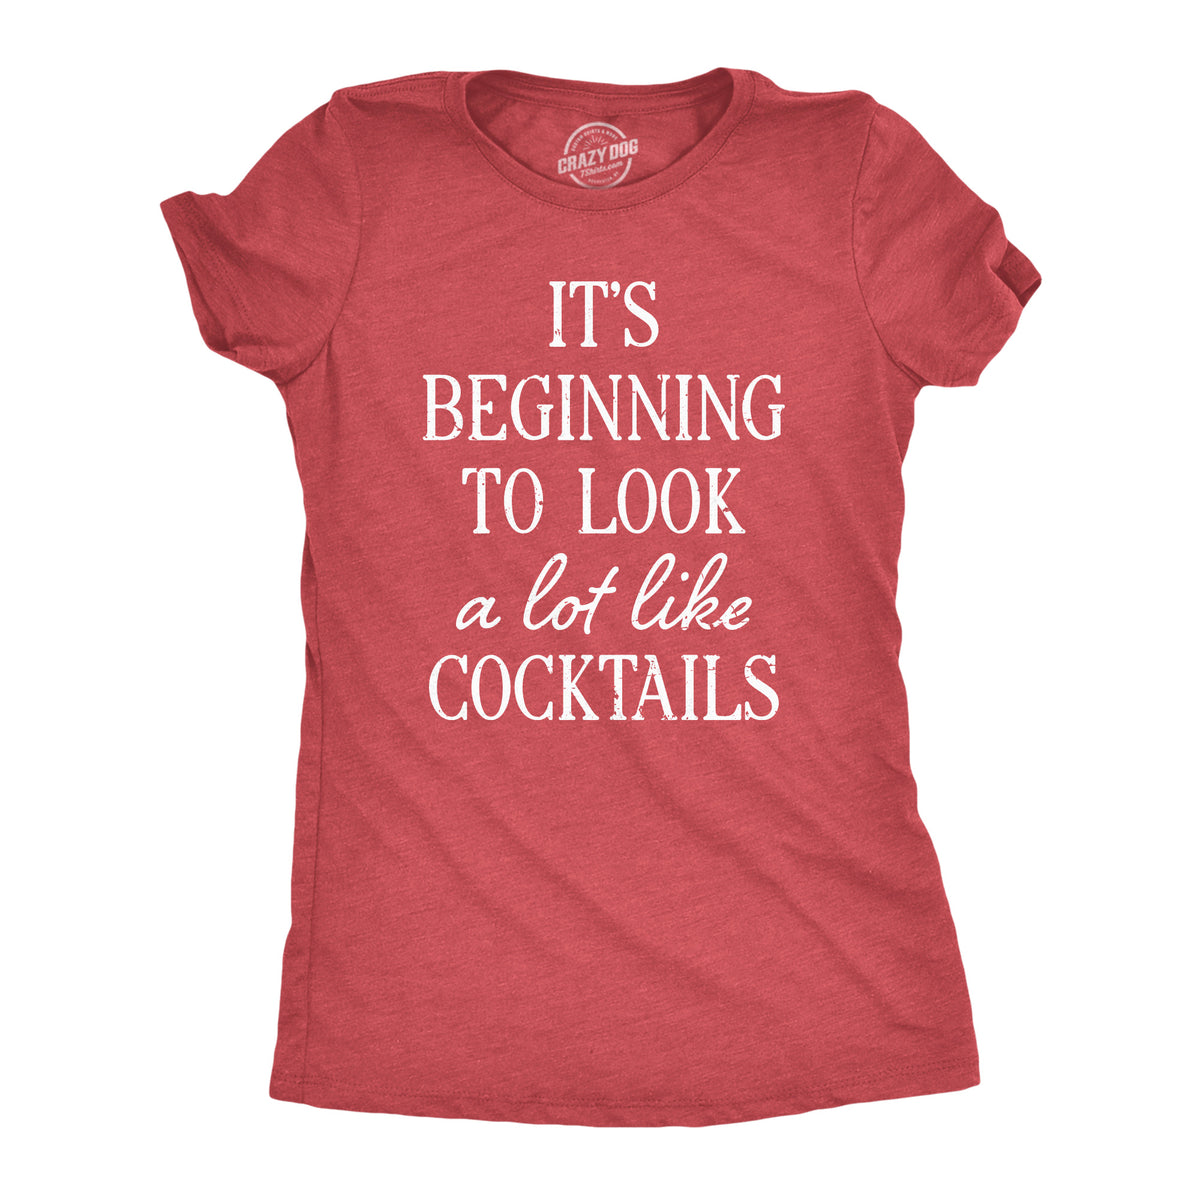 Funny Heather Red - COCKTAILS Its Beginning To Look A Lot Like Cocktails Womens T Shirt Nerdy Christmas Drinking Tee